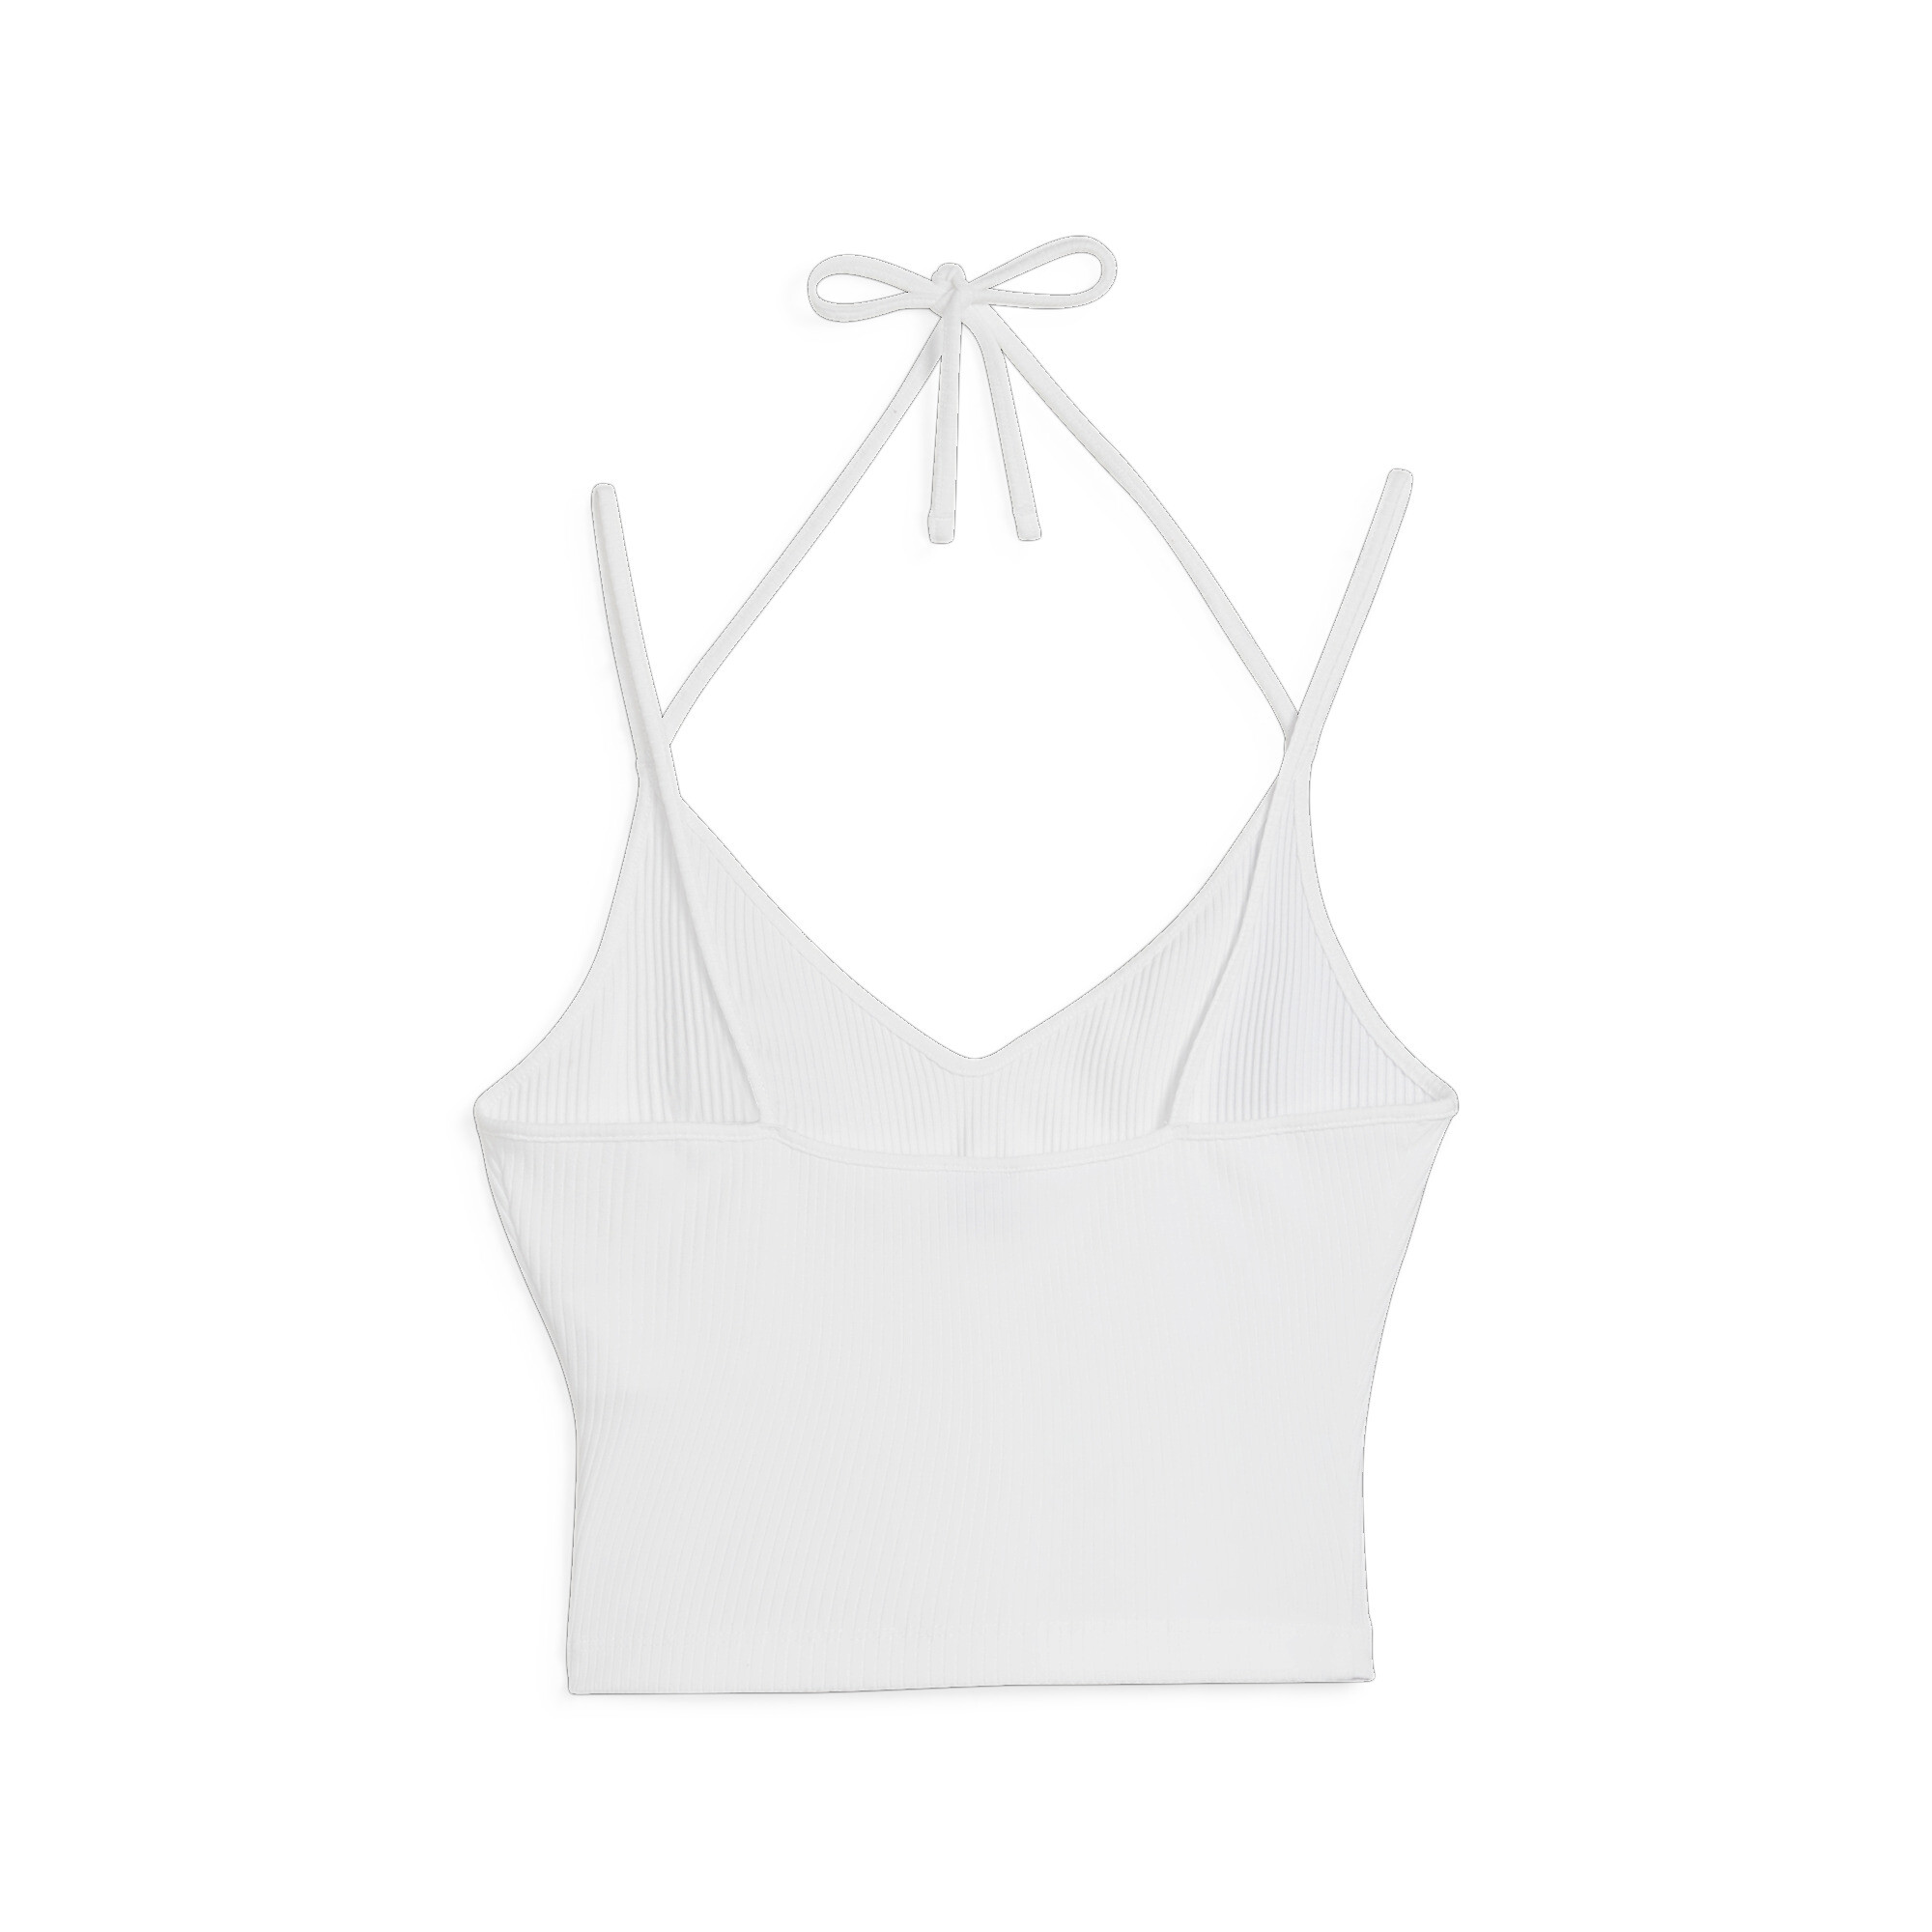 Women's PUMA CLASSICS Ribbed Crop Top In White, Size Small